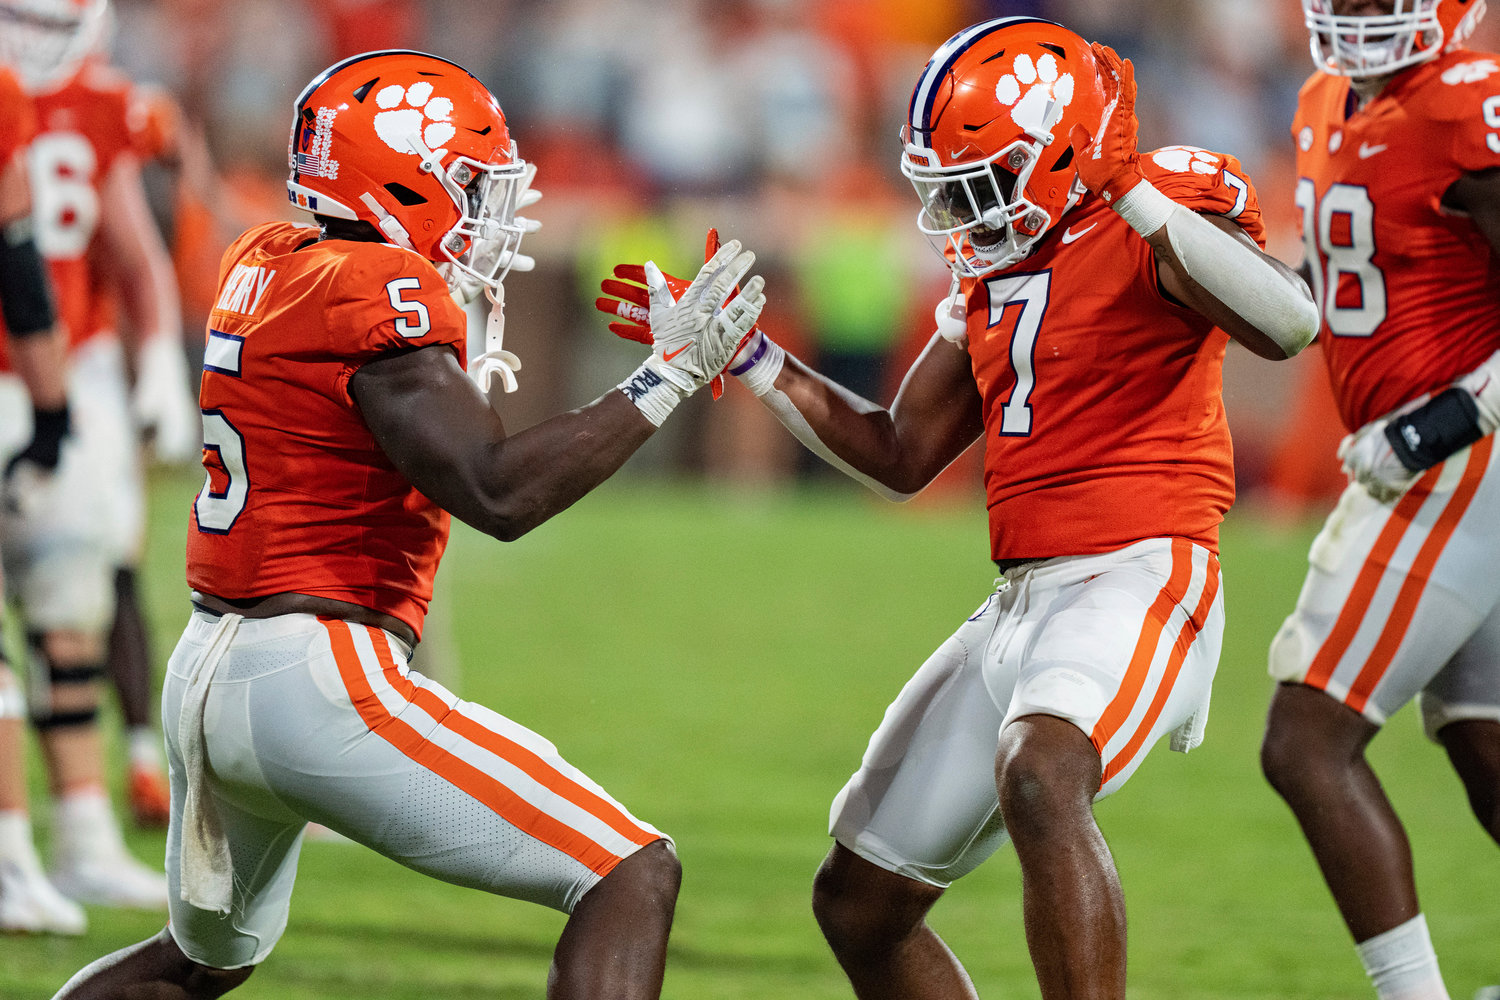 Clemson defensive end K.J. Henry (5) and defensive end Justin Mascoll (7) celebrate after a stop against Louisiana Tech on fourth down Saturday in Clemson, S.C.